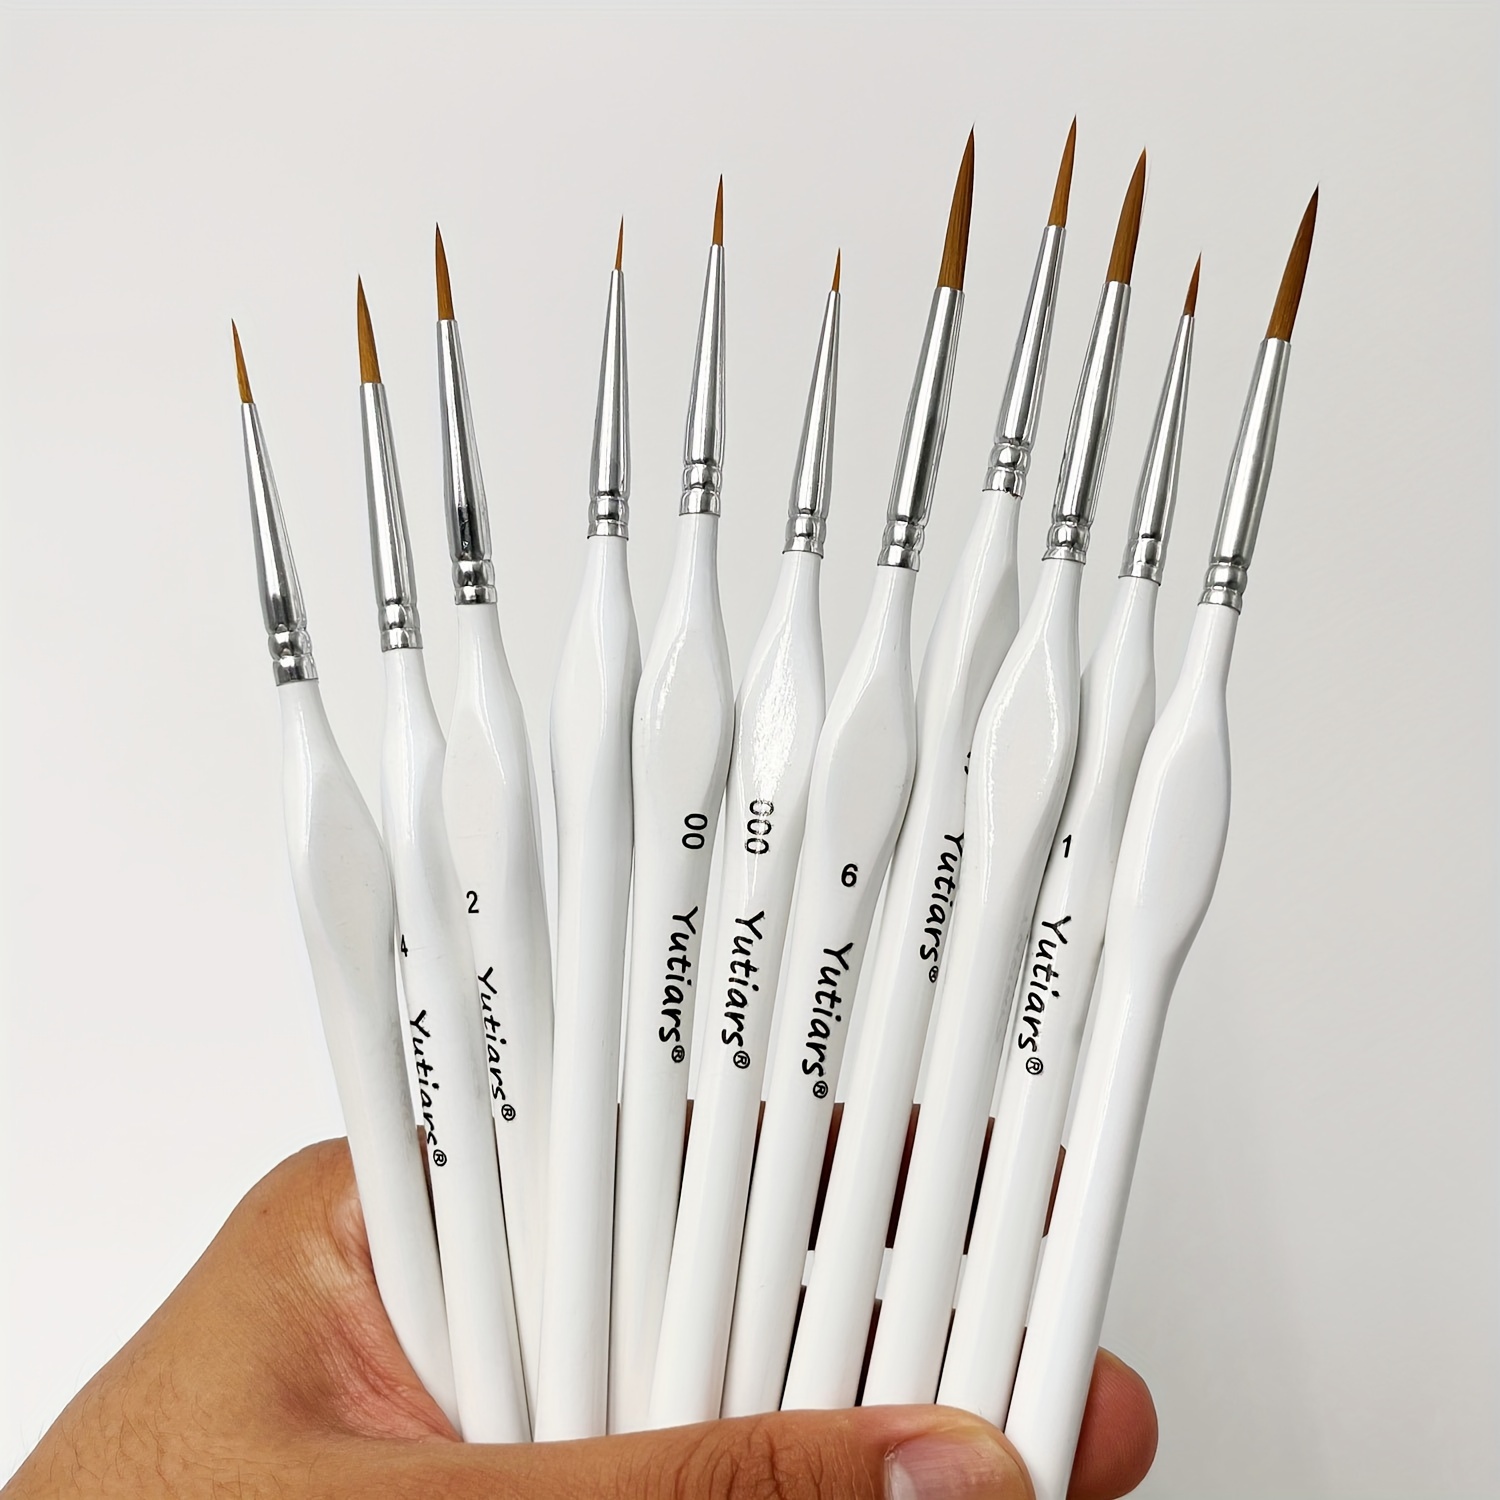 

Yutians Premium Quality Detail Paint Brushes Set, 11 Pcs Miniature Brushes For Fine Detailing & Art Painting - Acrylic, Oil, Watercolors & Paint By Number, Models, Face, Nail, Craft, 40k